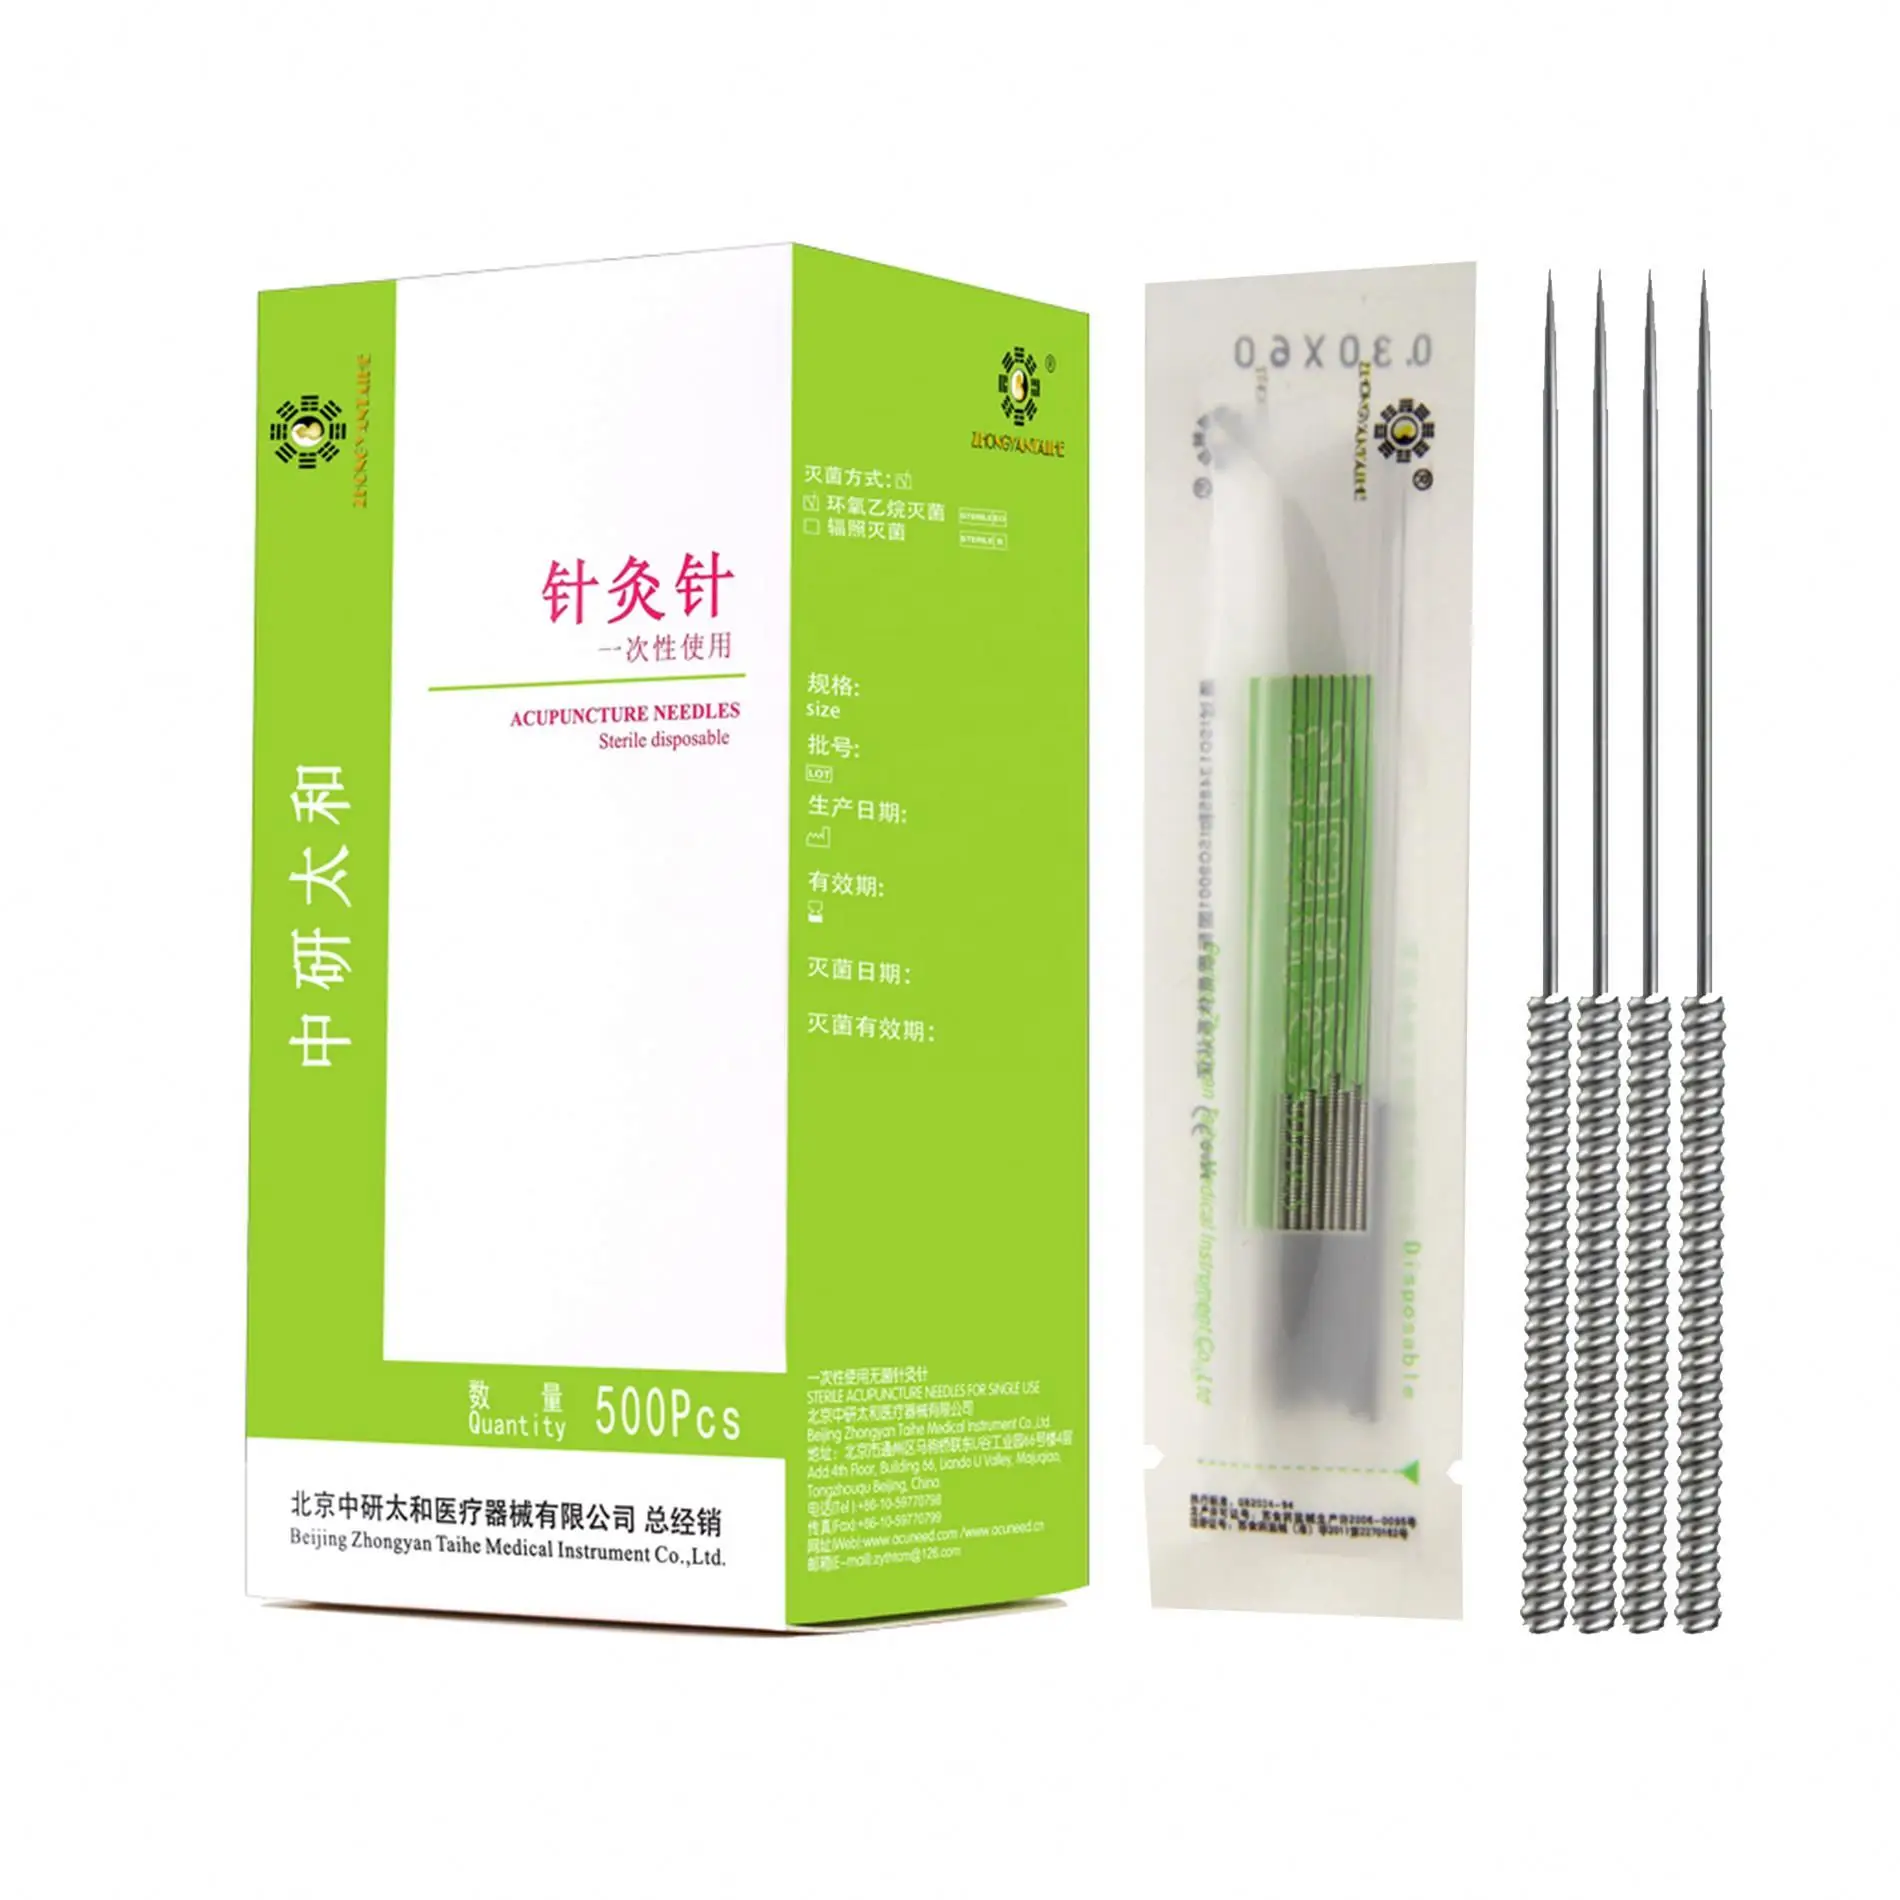 

zhongyan taihe Zhongyan Taihe Wholesale 500pcs Intradermal Medical Painless Disposable Sterile Acupuncture Needles With Tube